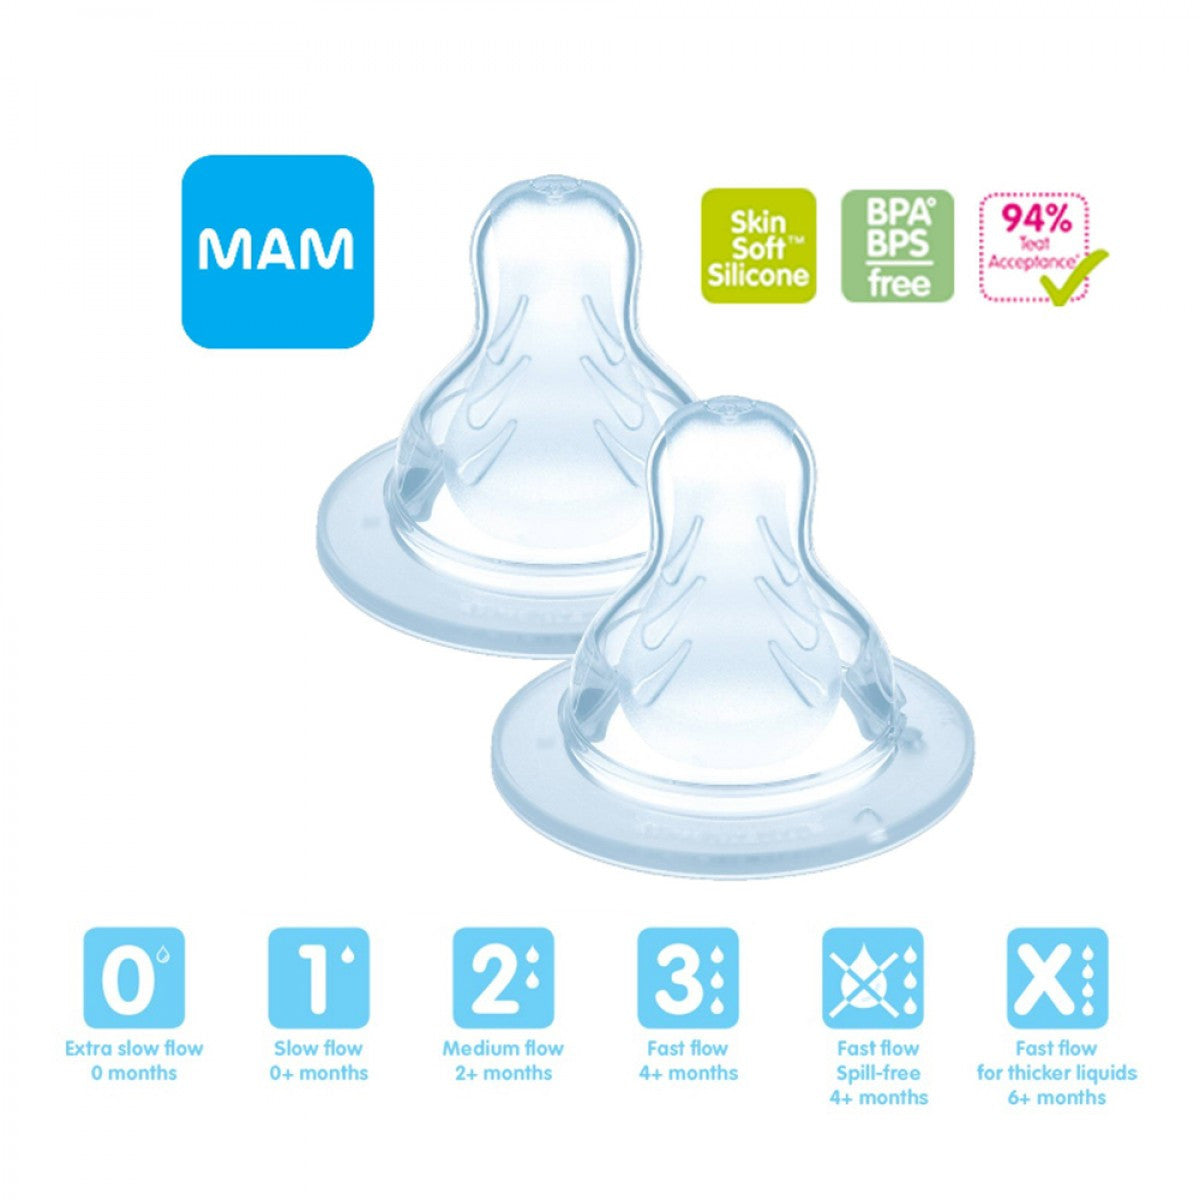 Mam Skin Soft Silicone Silk Teats Nipples Available In Extra Slow, Slow, Medium, Fast, Fast Spill-Free or X Cut Flow